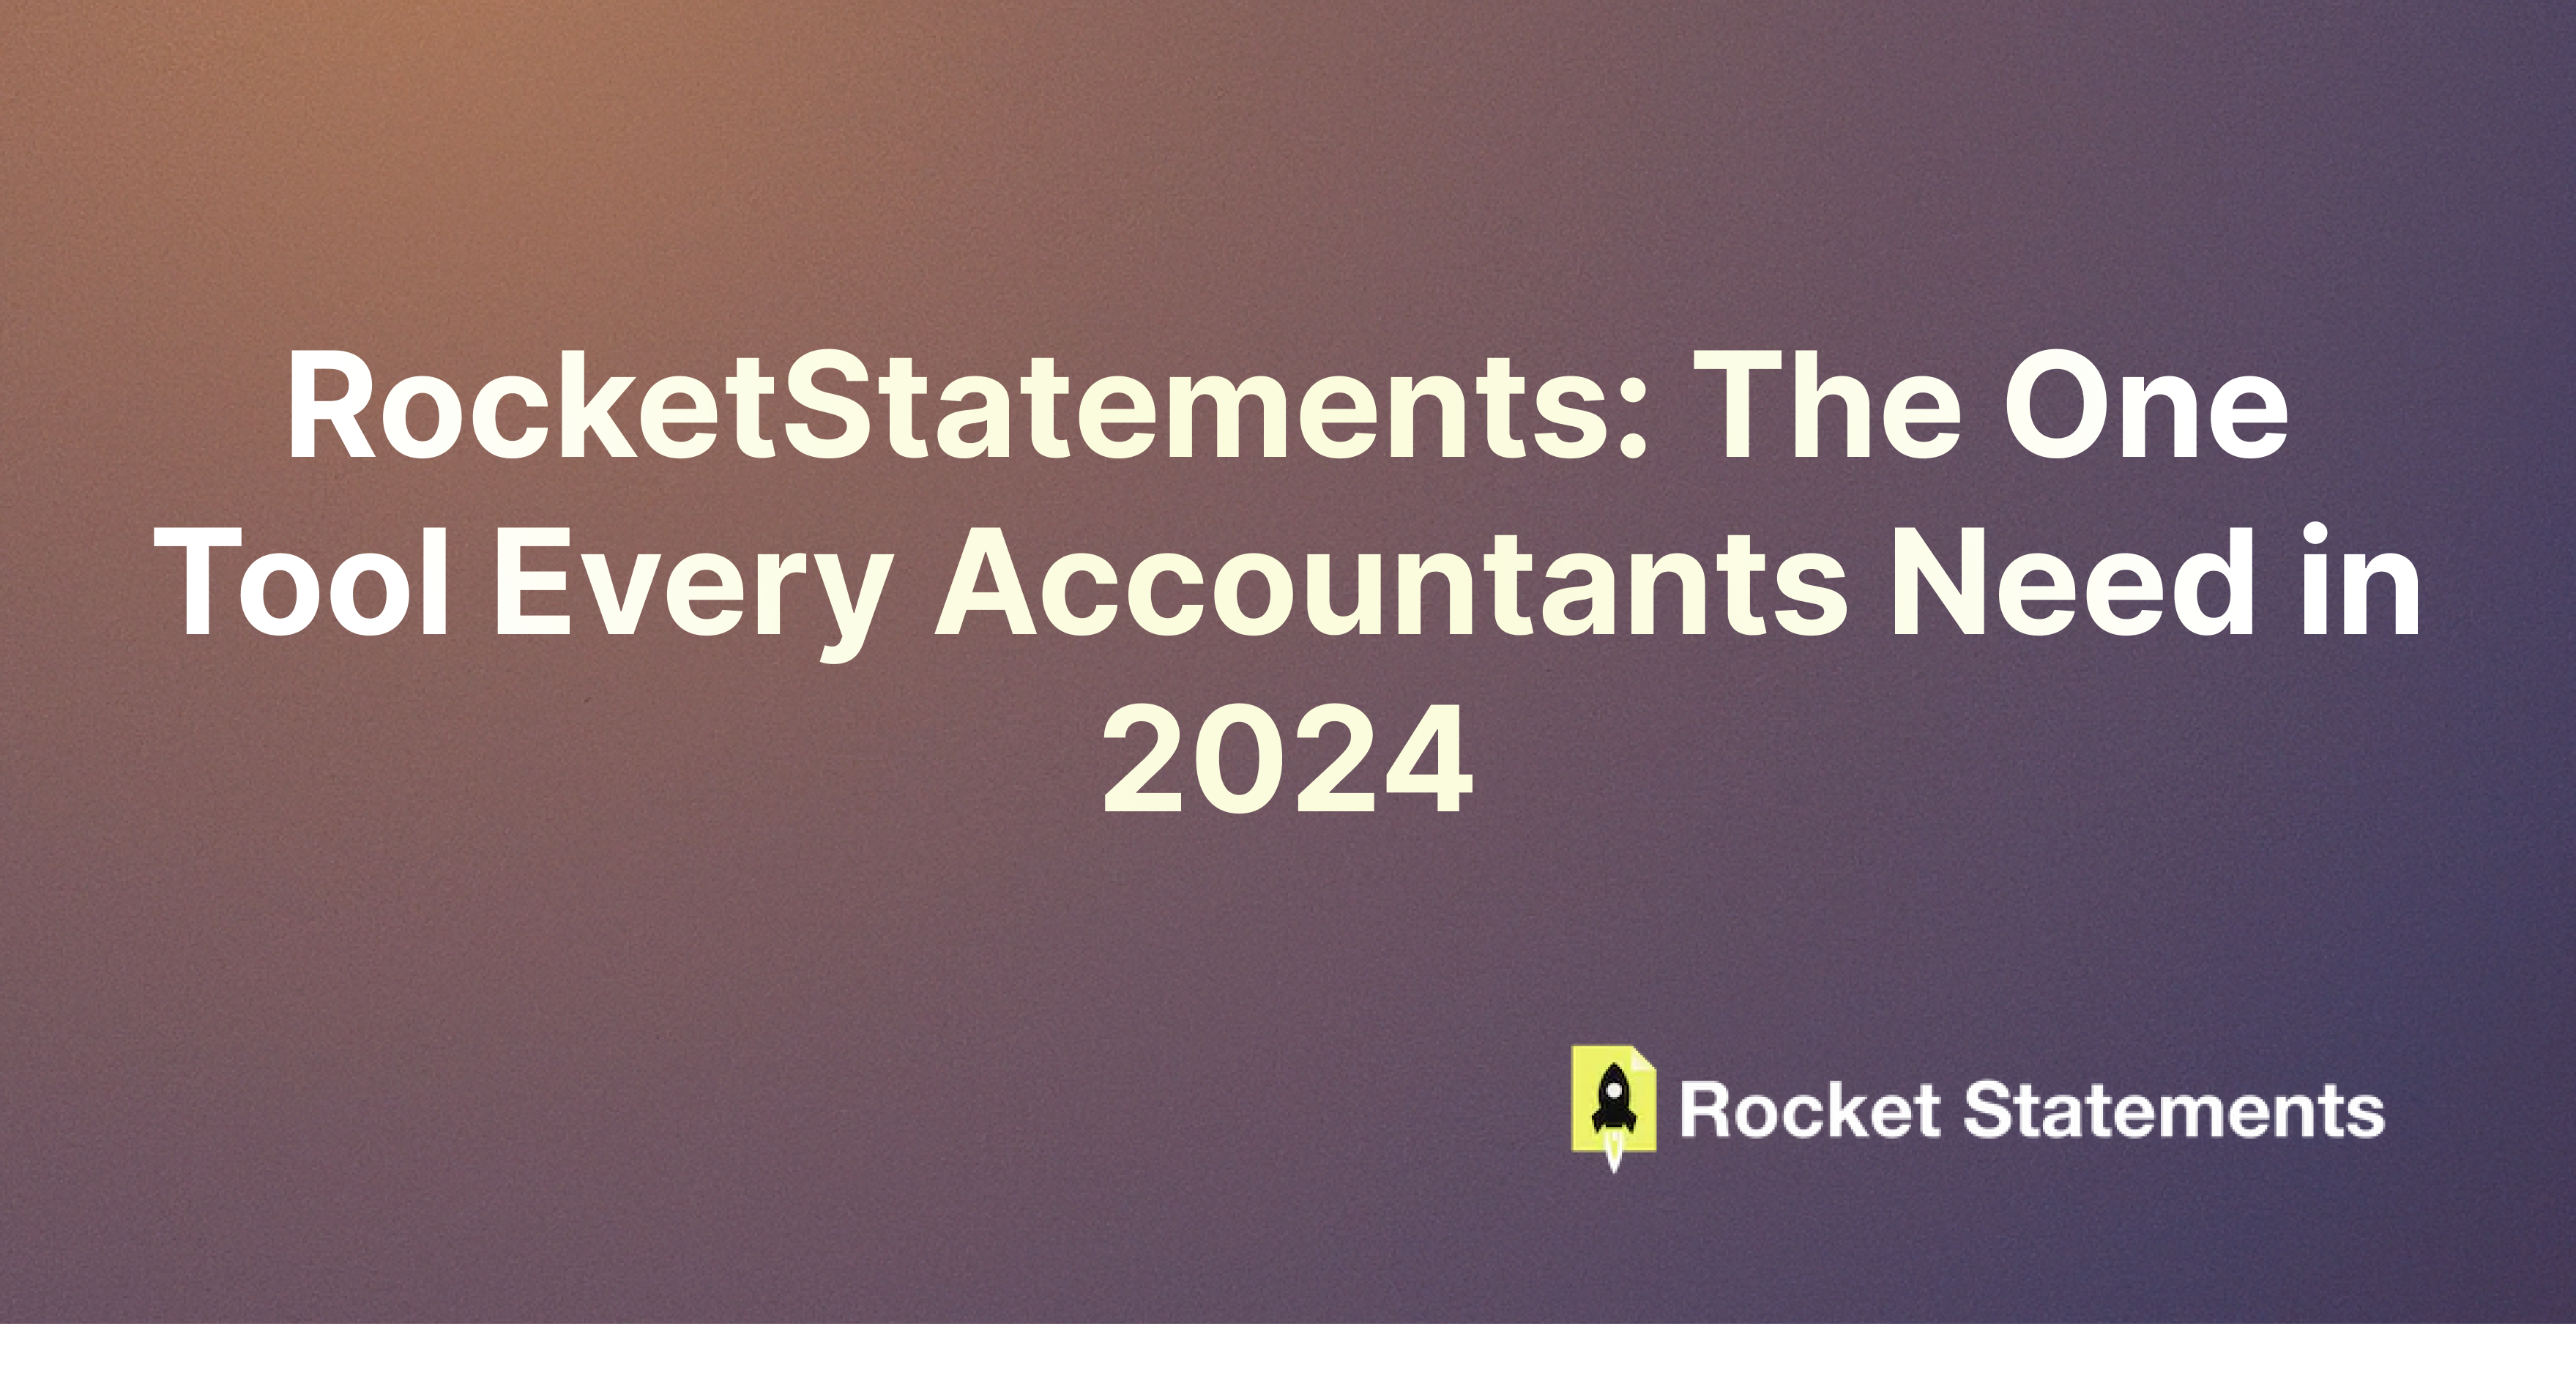 RocketStatements: The One Tool Every Accountants Need in 2024